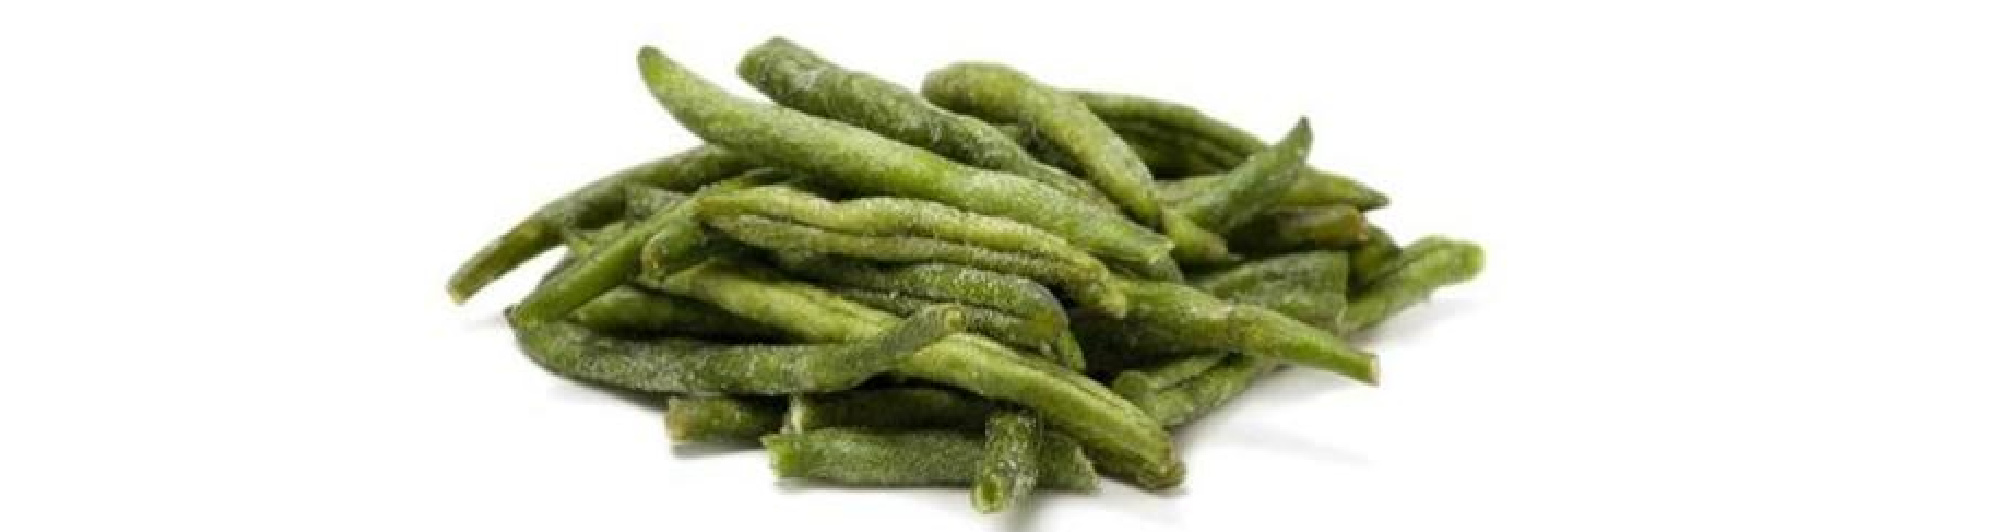 image of how to freeze dry green beans